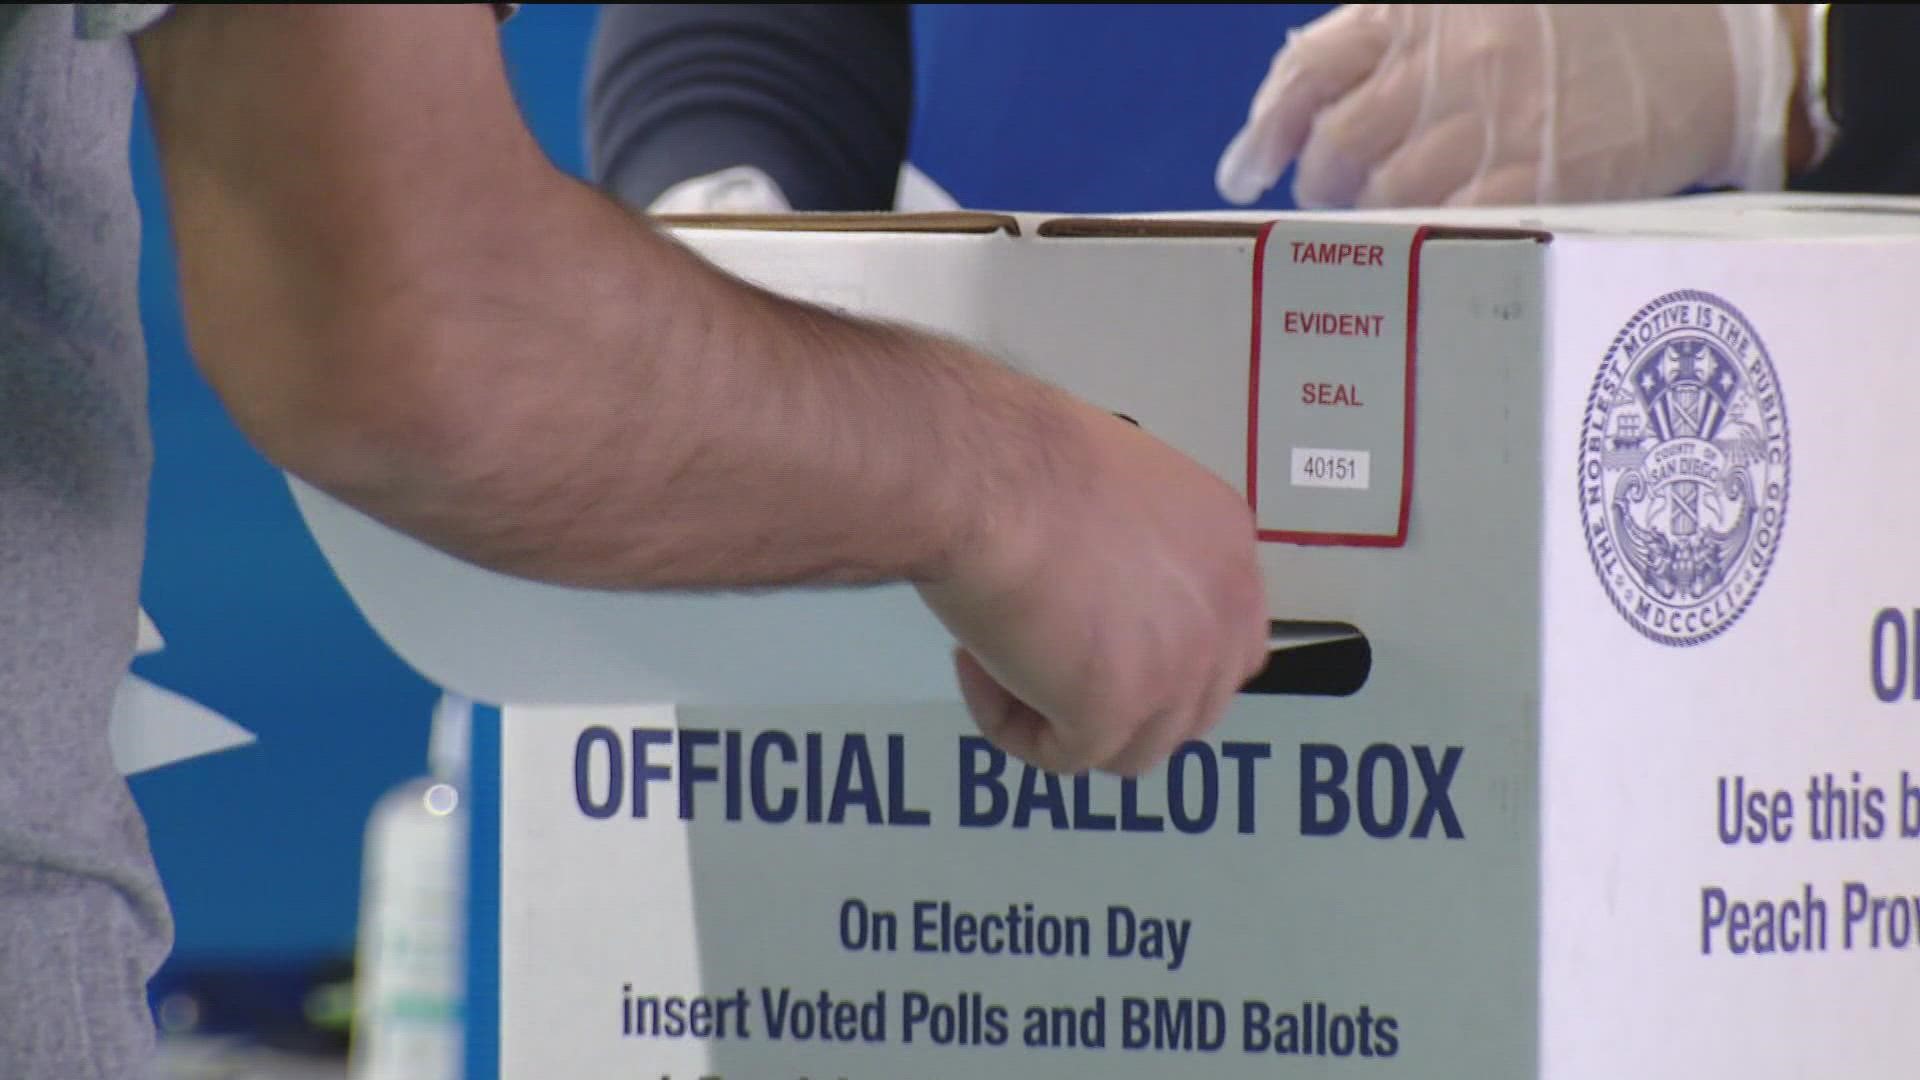 Voting centers and ballot drop boxes will be open on Election Day, June 7, from 7 a.m. to 8 p.m. in San Diego County.